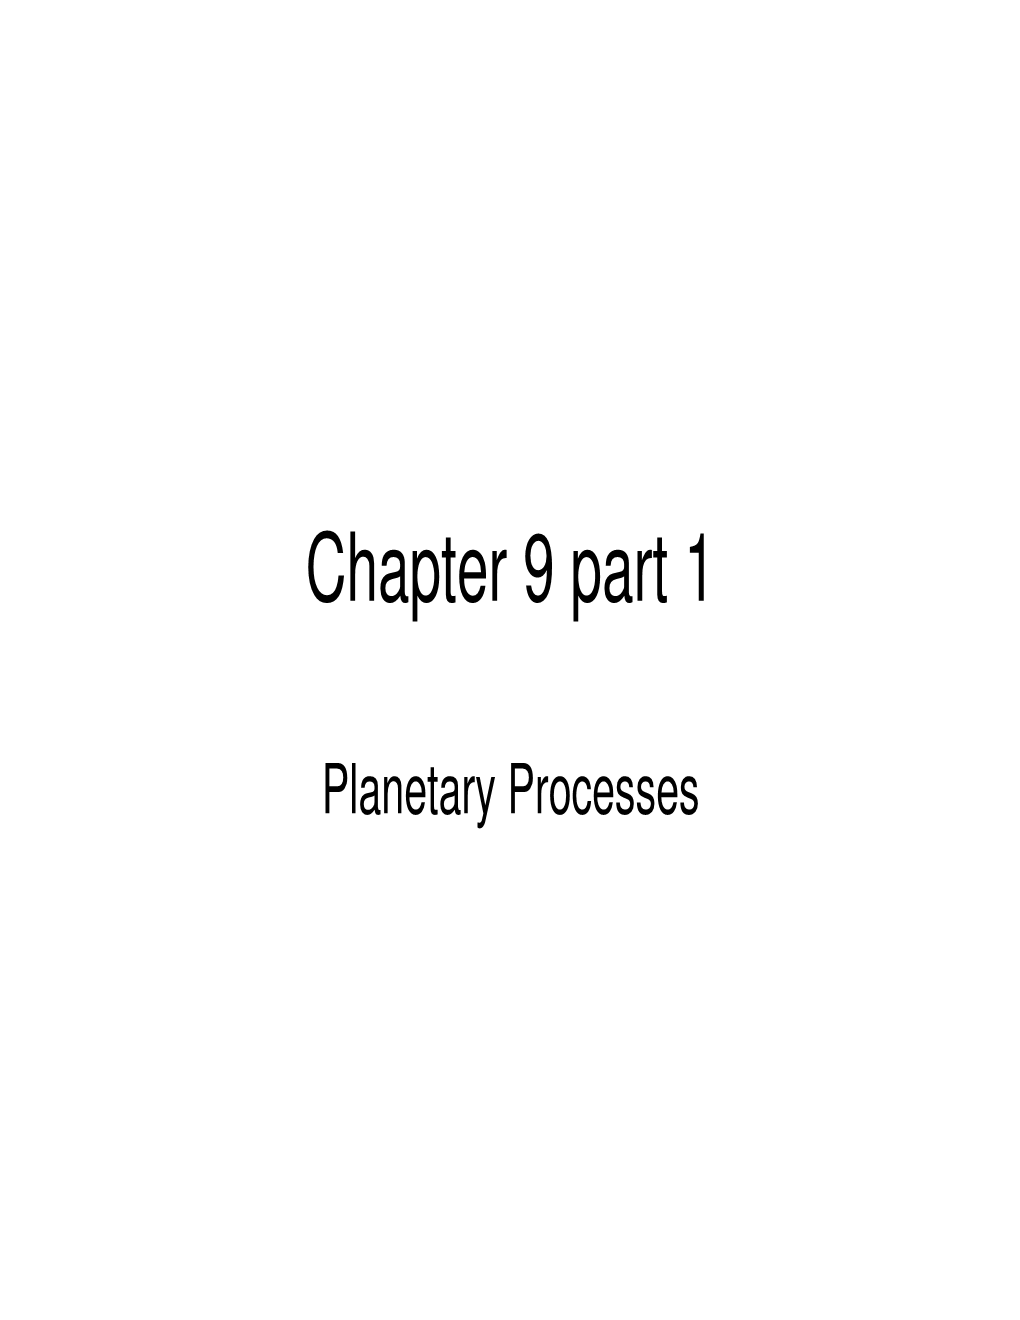 Chapter 9 Part 1